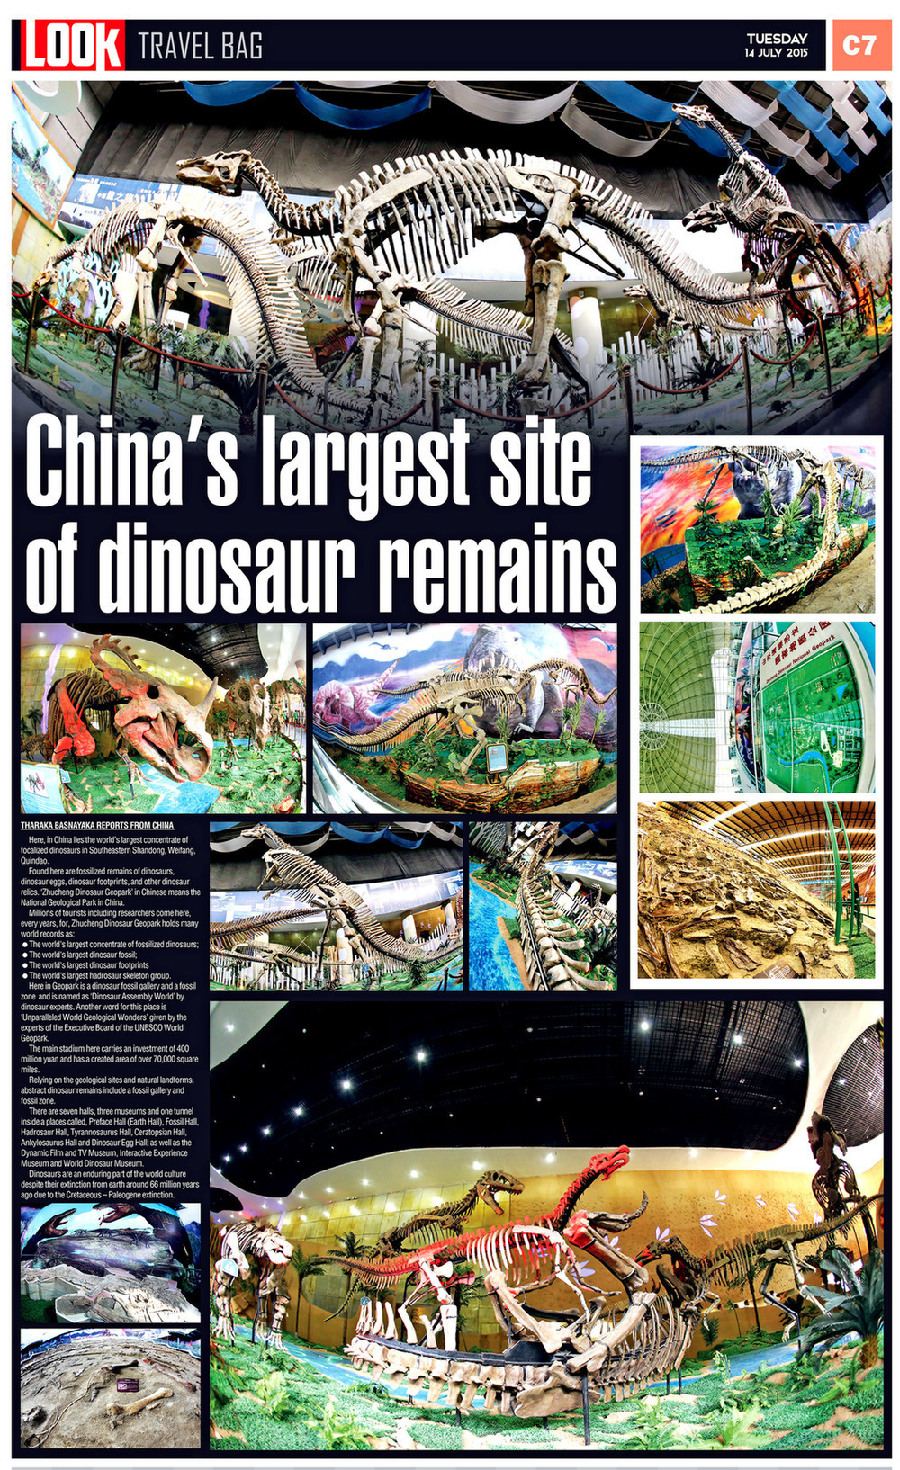 China's largest site of dinosaur remains